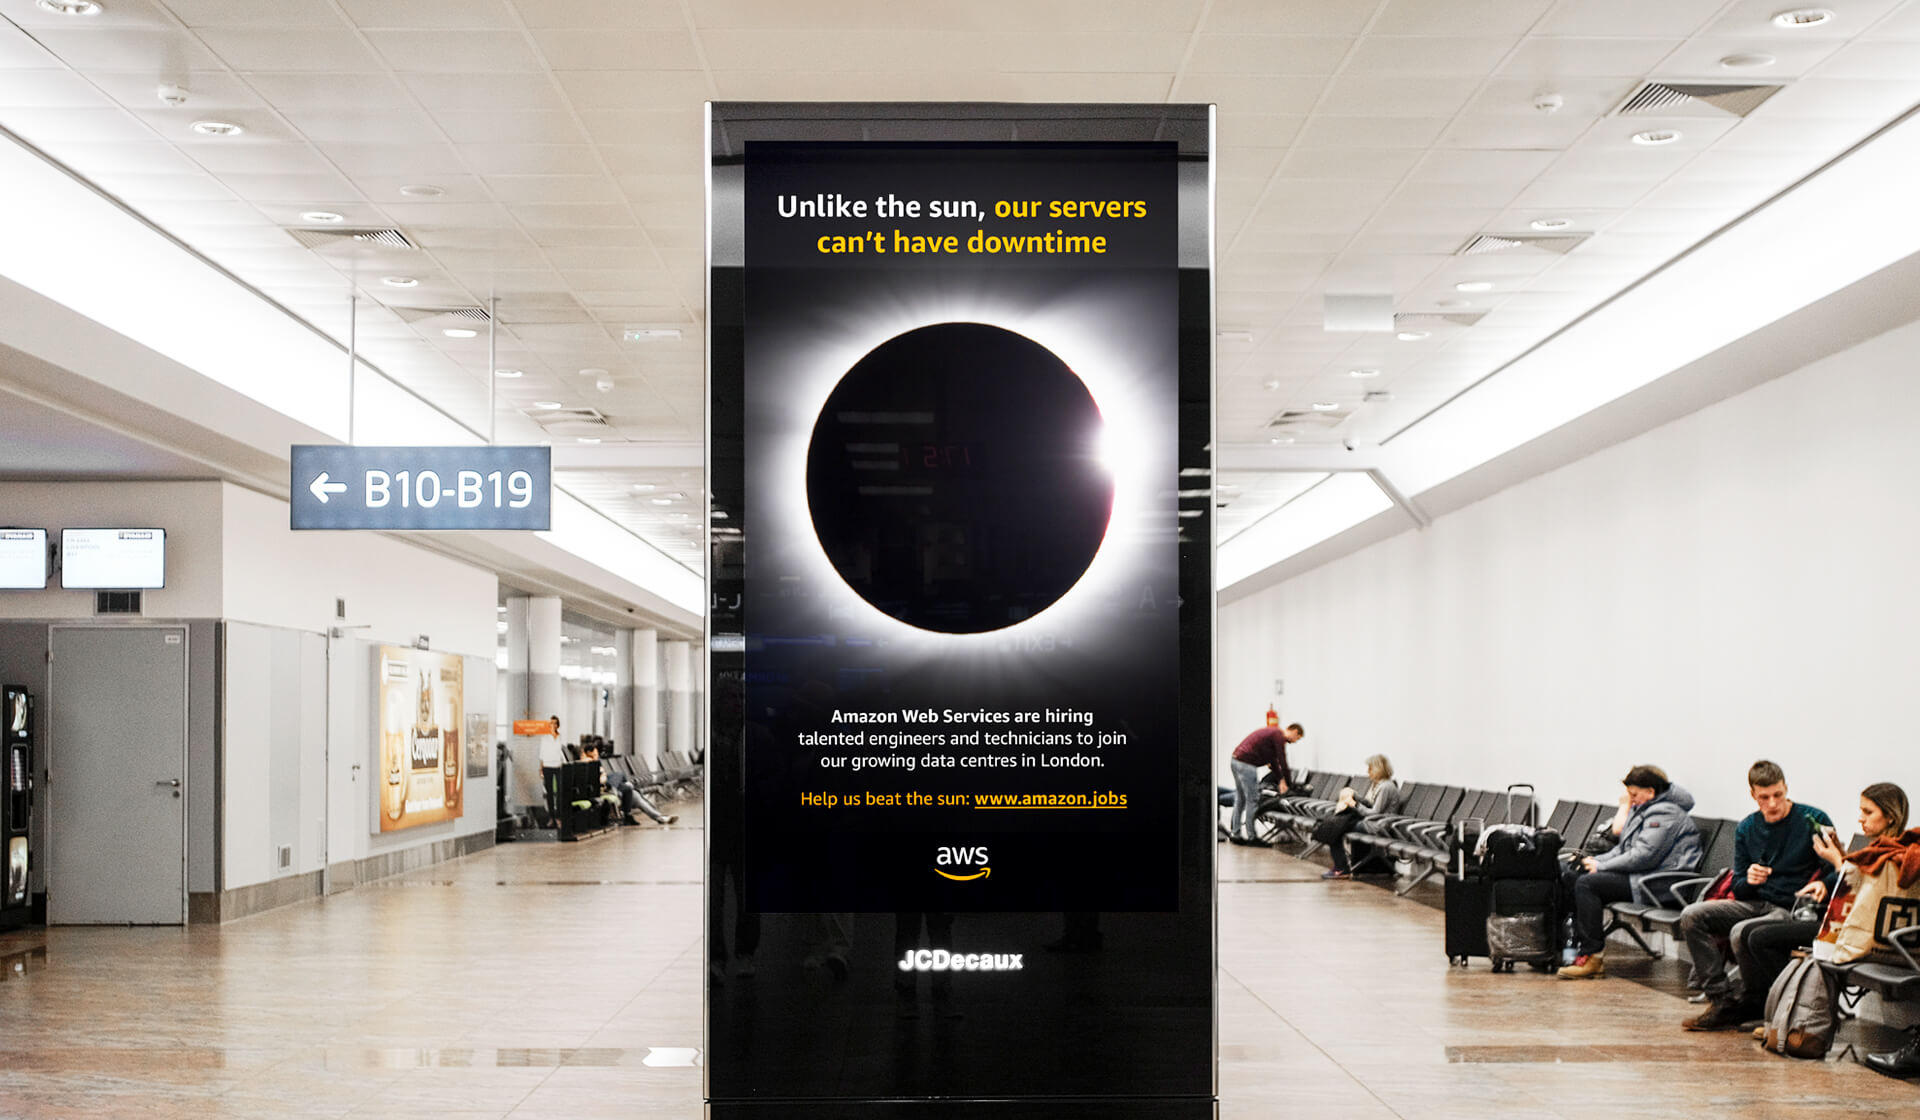 Amazon - Unlike The Sun - Mellor&Smith Advertising campaign at travel interchange